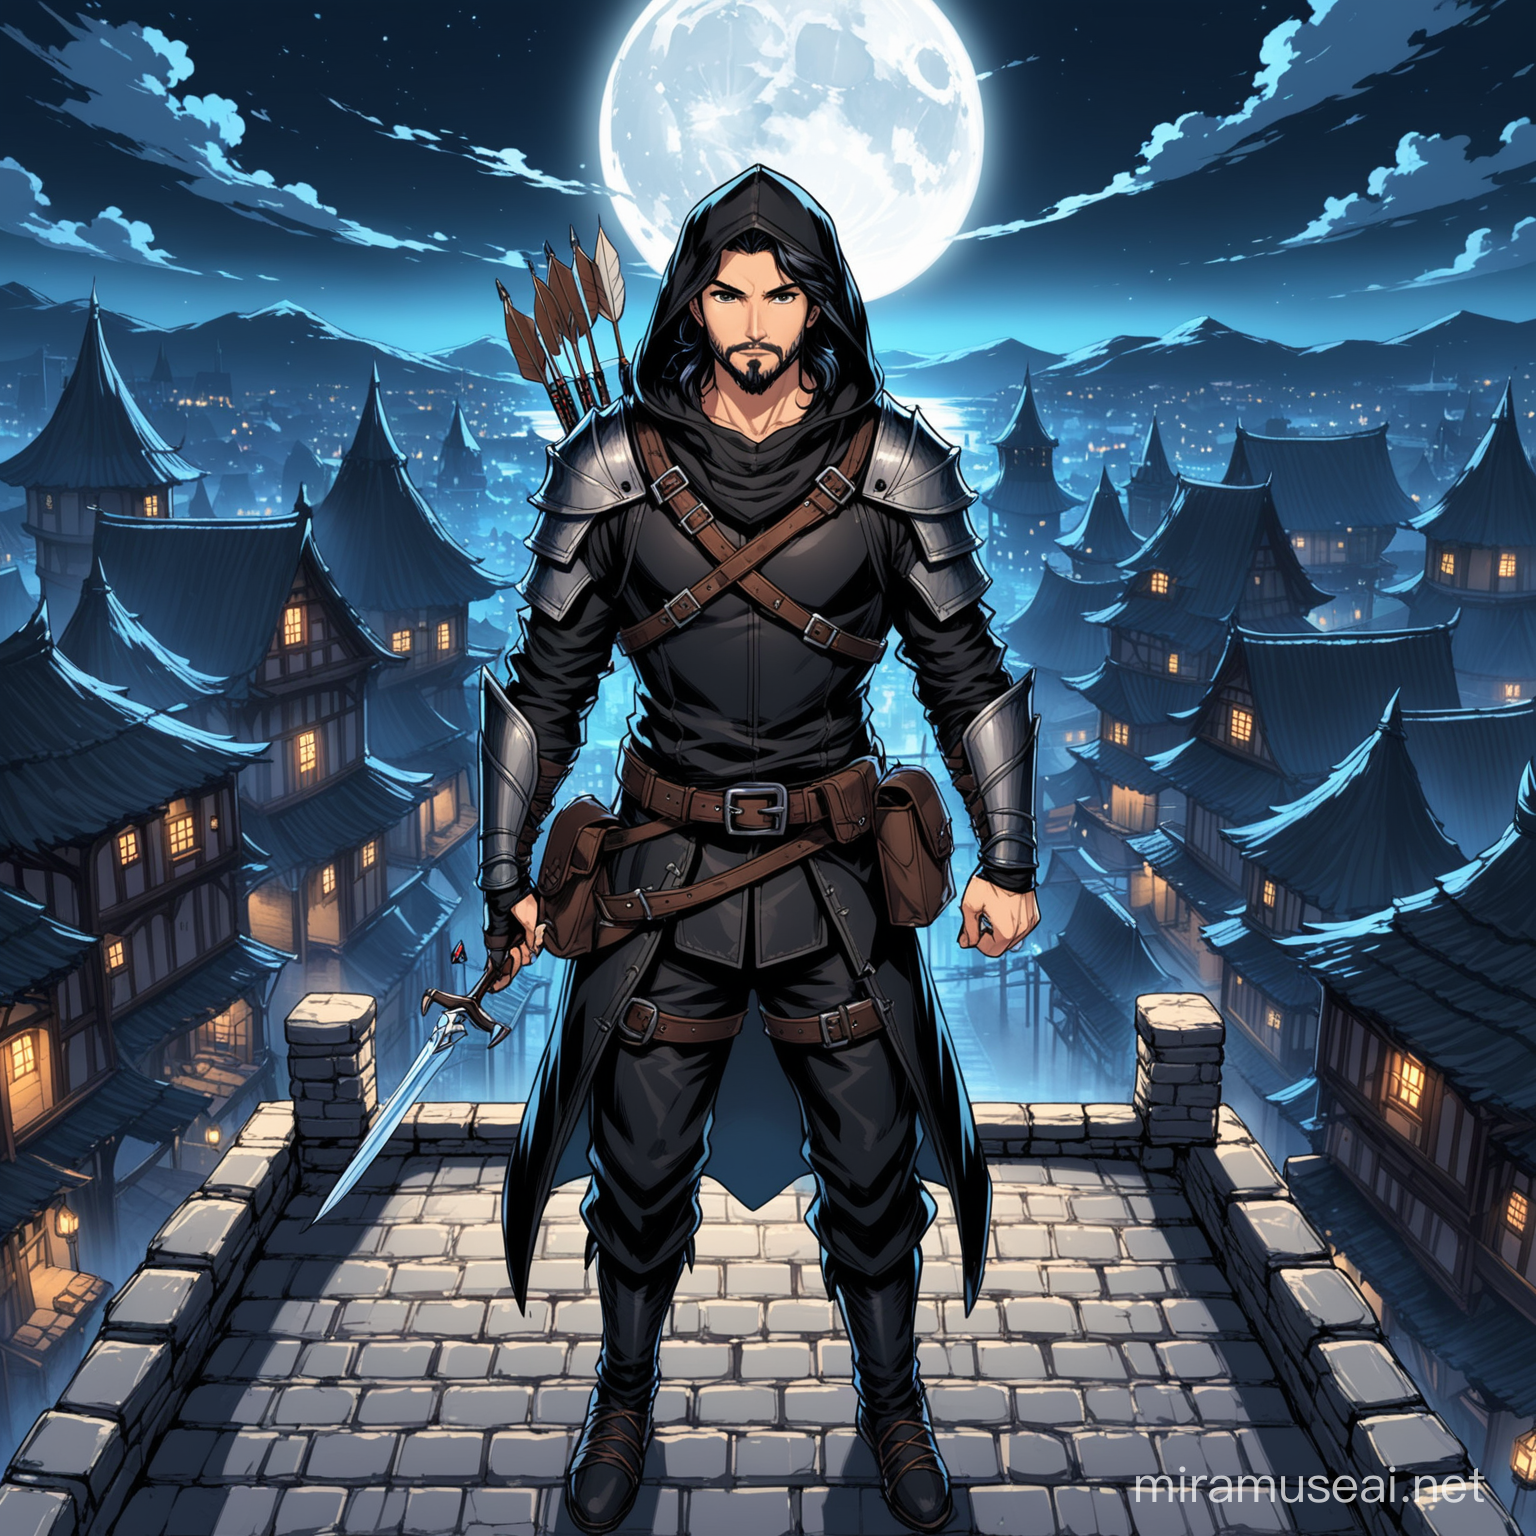 Character design, fantasy rpg rouge, young man, stubble, medium length black hair, wavy hair, wearing black hood and ninja face mask, black and grey rpg style lightweight leather armour, holding bow in left hand, holding dagger in right hand, arrow quiver at back, black leather belt with pouches and potion vials, Character design, fantasy rpg rouge, young man, stubble, medium length black hair, wavy hair, wearing hood, black and grey rpg style lightweight leather armour, holding bow in left hand, holding dagger in right hand, arrow quiver at back, black leather belt with pouches and potion vials, view from front, dark night fantasy town rooftop background, moonlight, shadow, crouched down, side profile looking at the town from above, view from front, dark night fantasy town rooftop background, moonlight, shadows